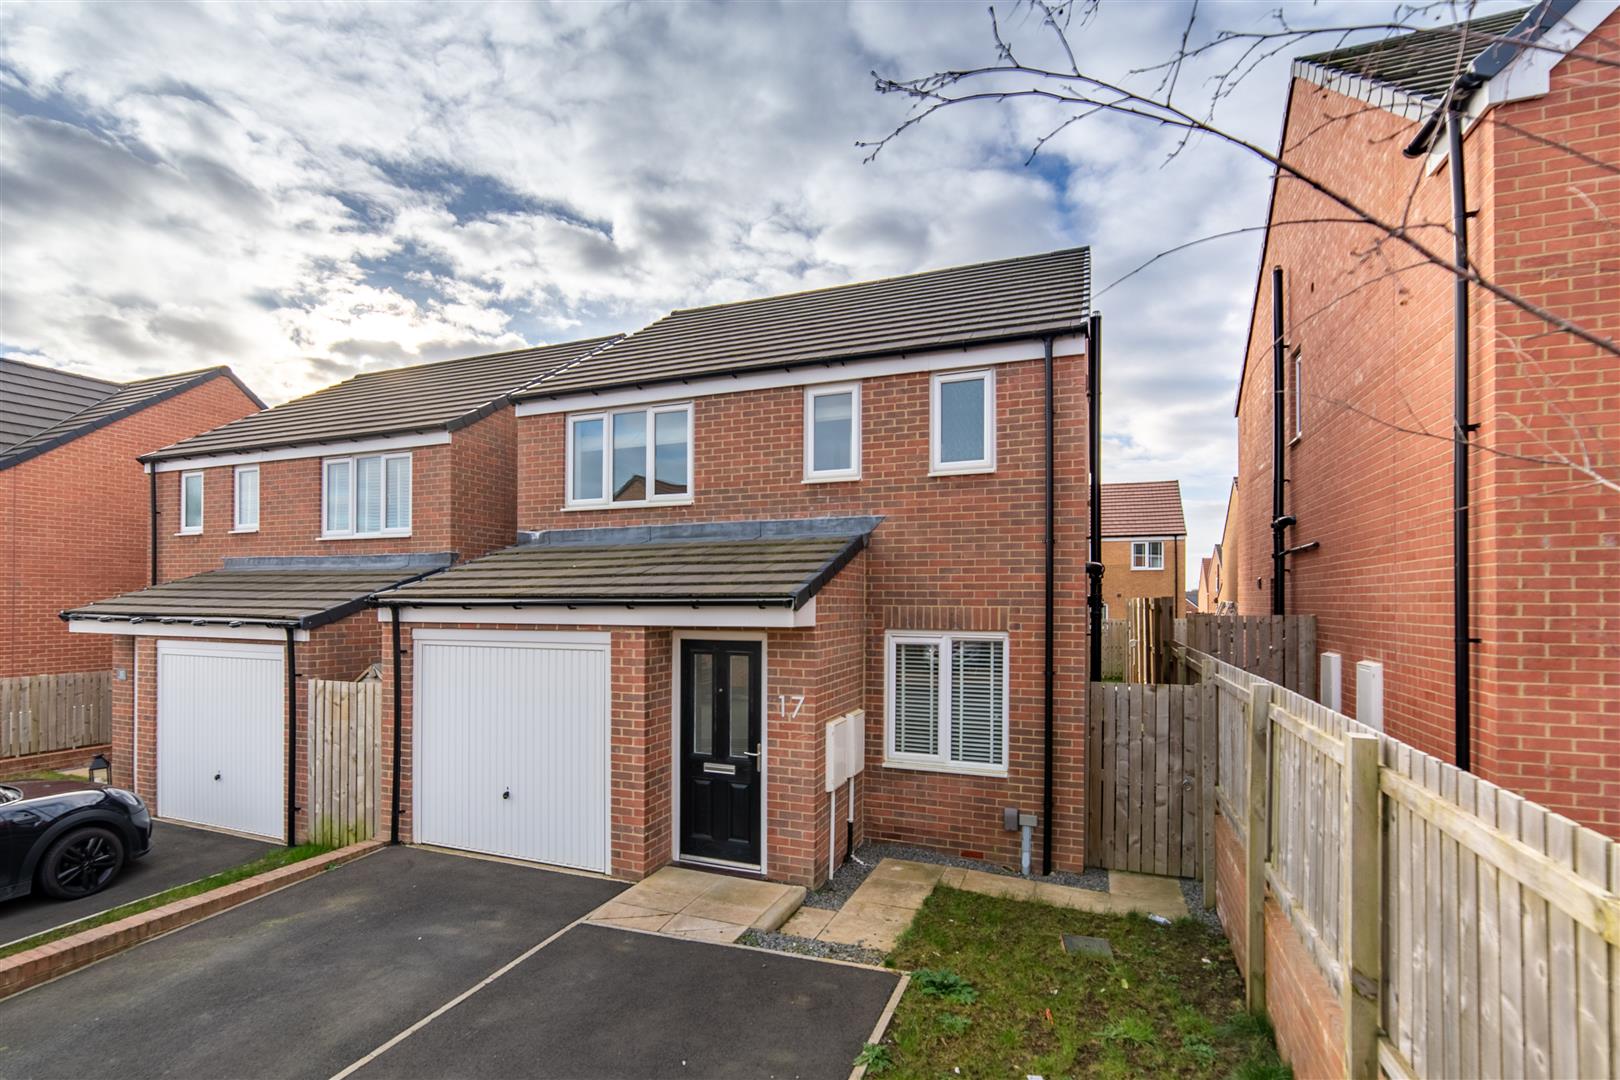 3 bed detached house for sale in Fairhaven Way, Cramlington - Property Image 1